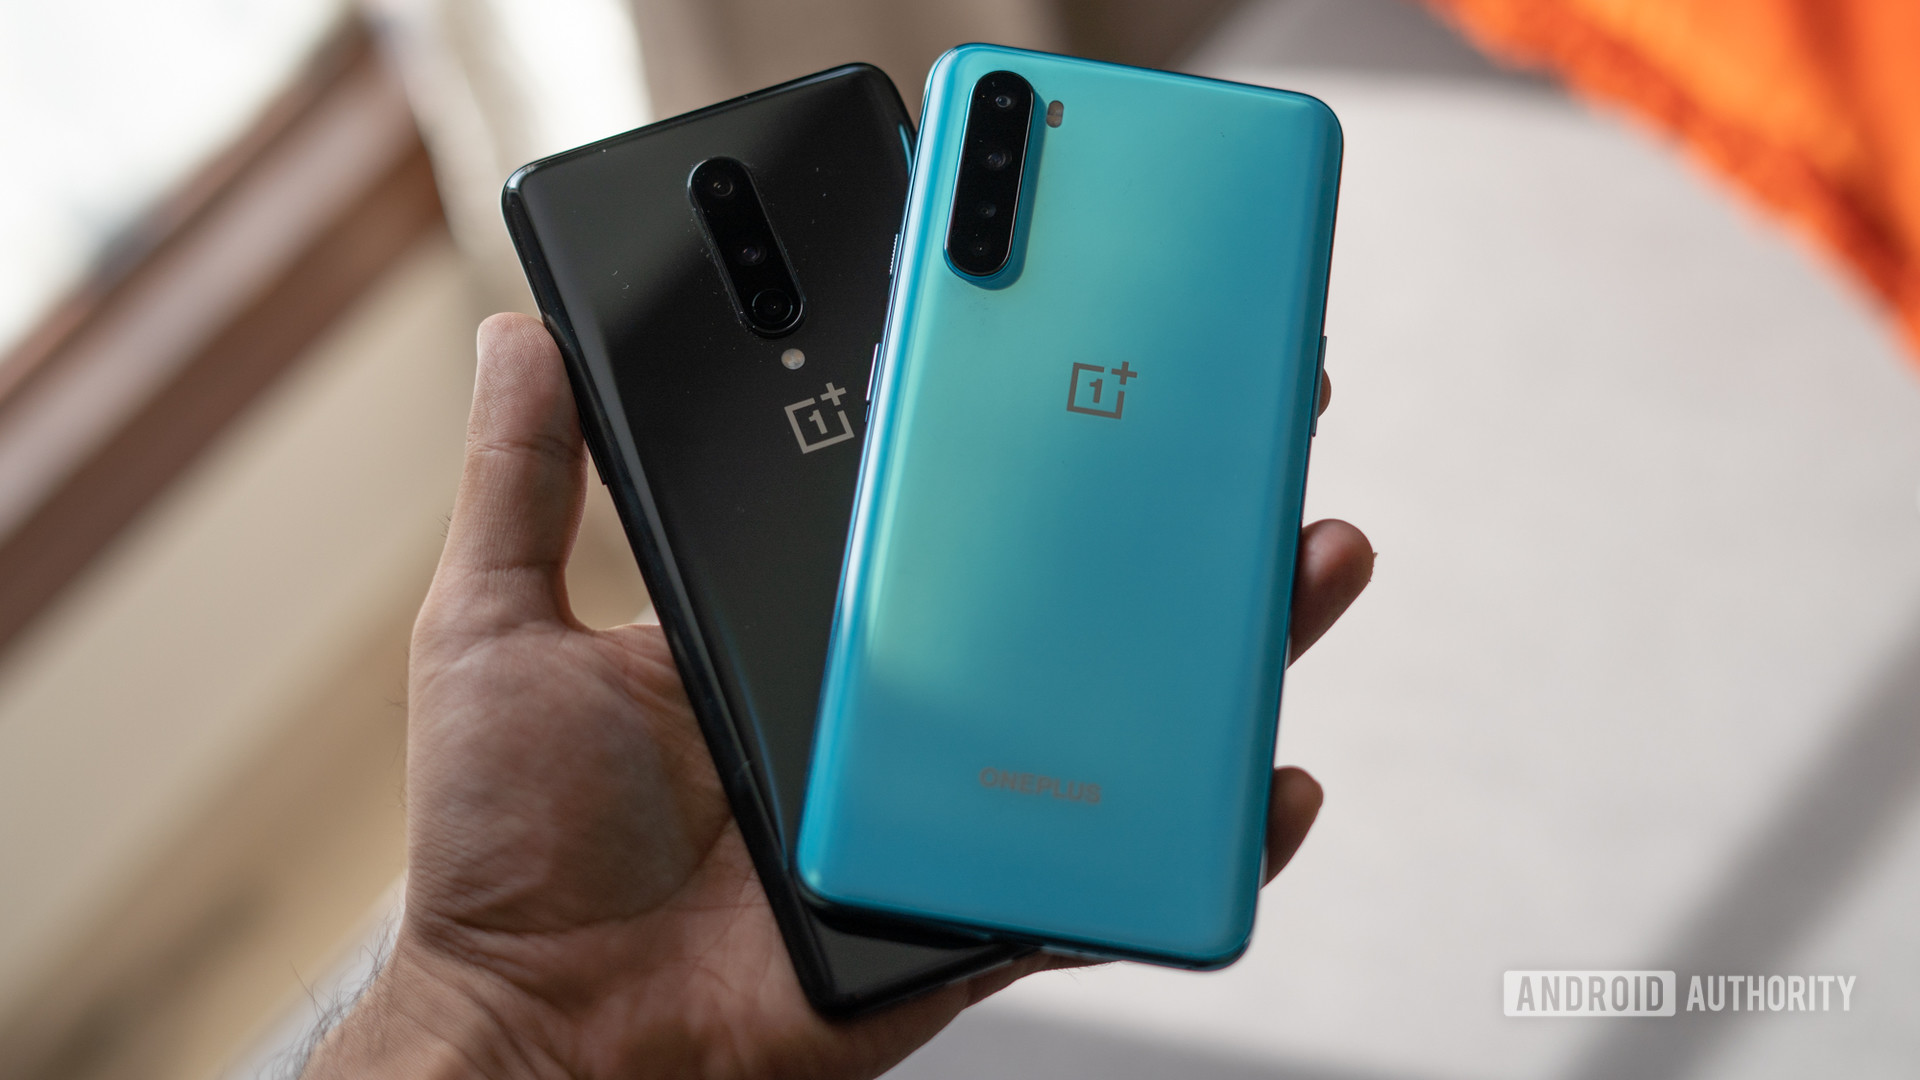 OnePlus Nord vs OnePlus 8 rear panel in hand